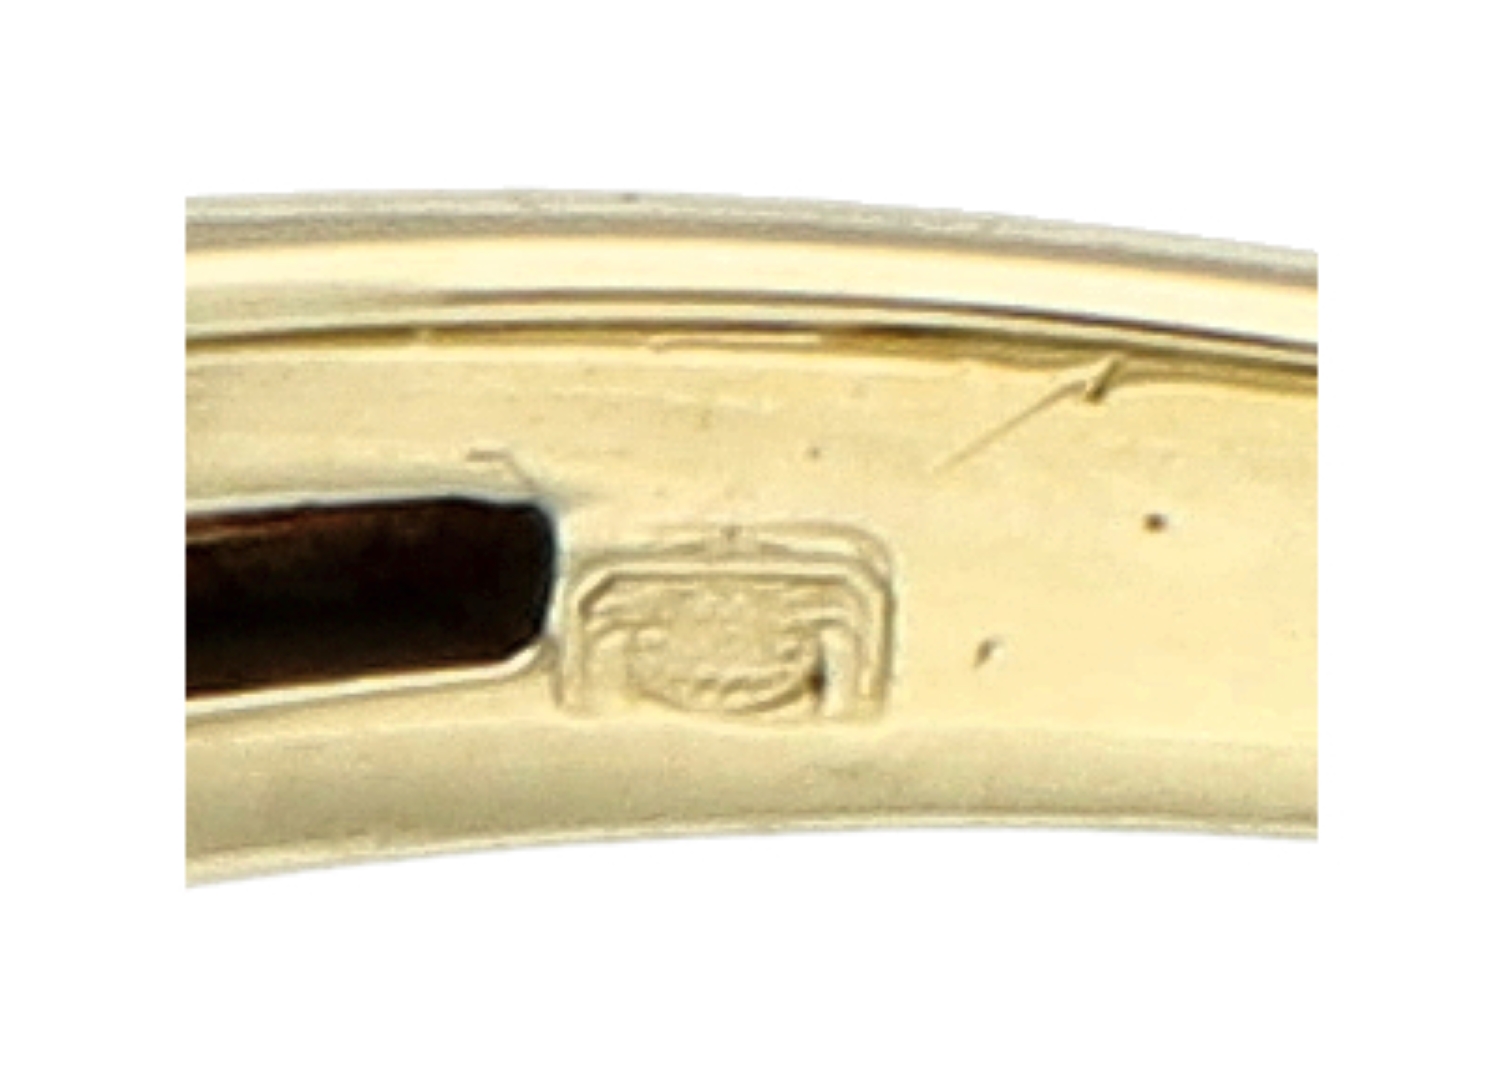 No Reserve - 14K Yellow gold demi-alliance ring set with approx. 0.48 ct. diamond. - Image 3 of 3